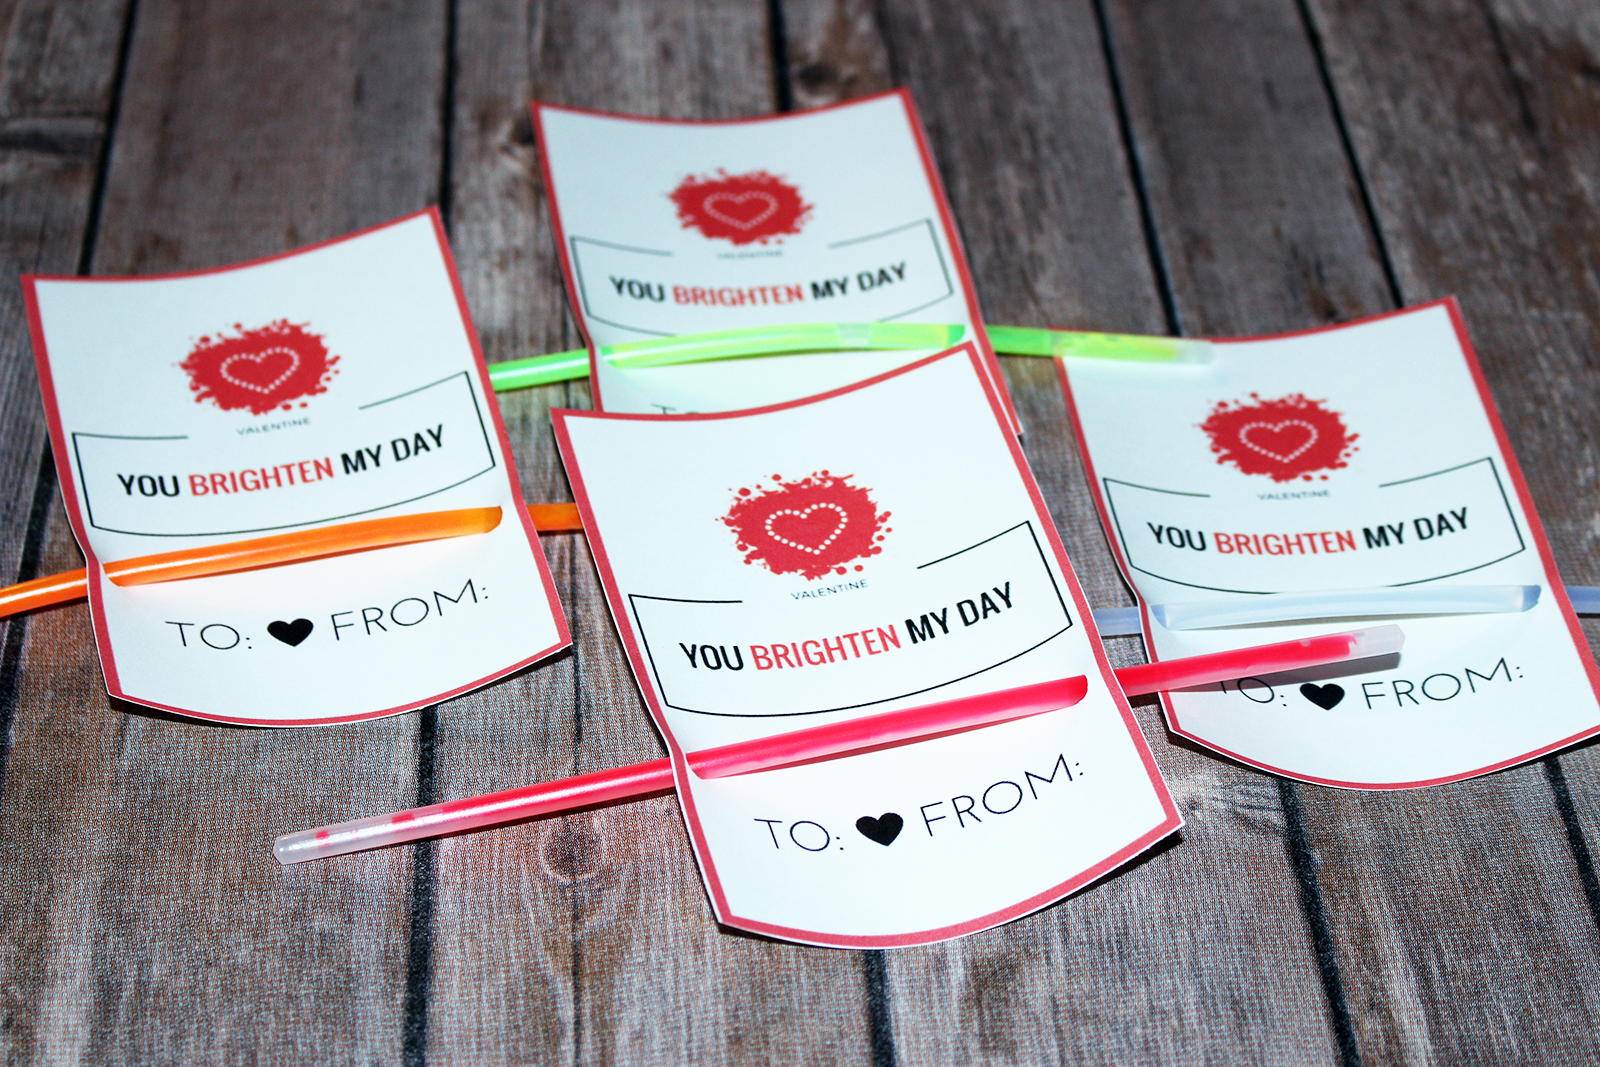 Homemade Valentine's Card For Kids - With Glow Sticks FREE Printable! - Six Time Mommy ...1600 x 1067